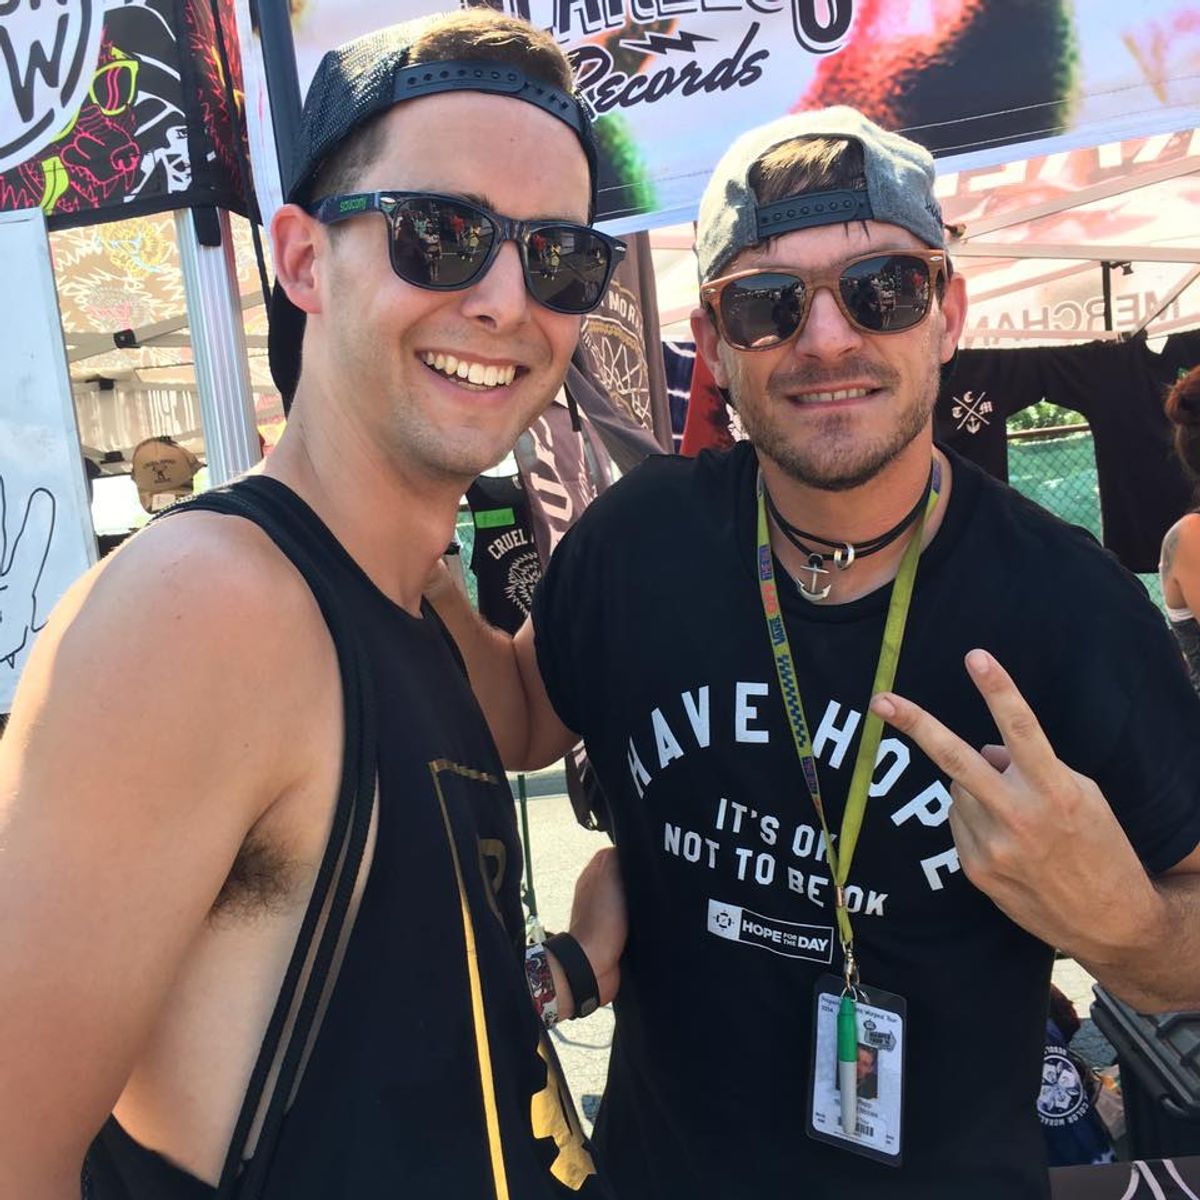 Warped Tour Is About More Than Just Music